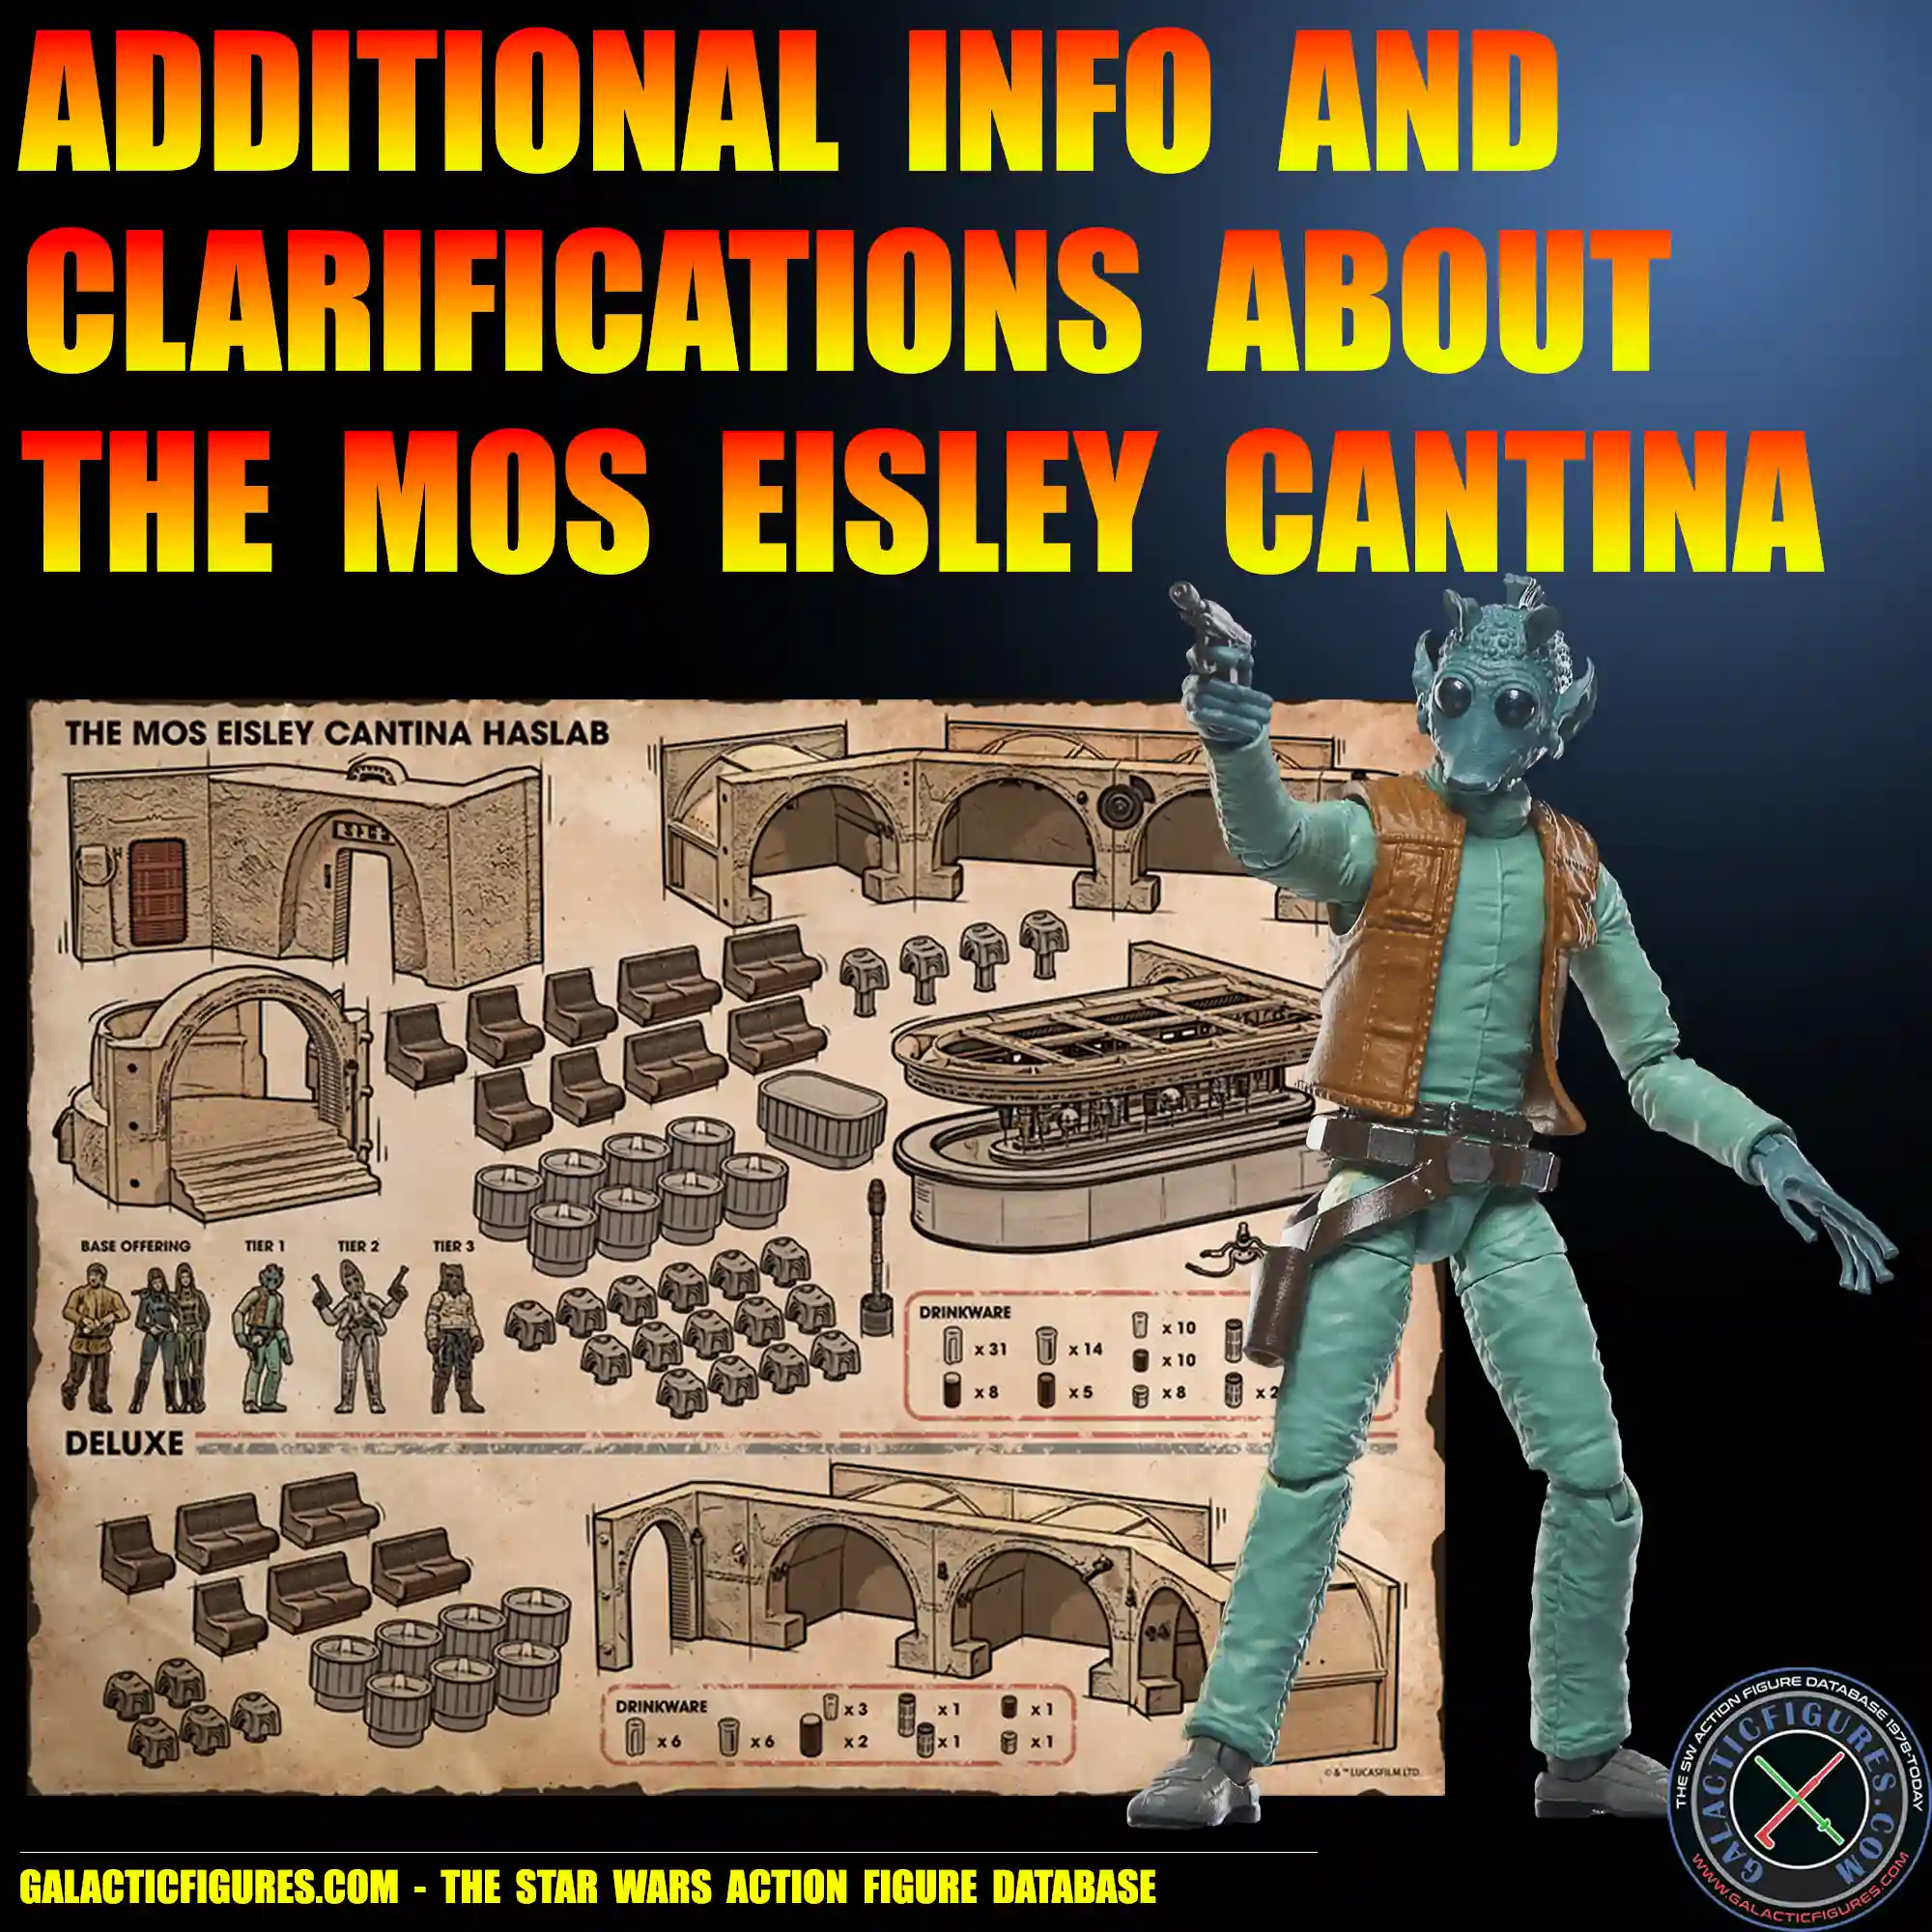 Mos Eisley Cantina - Additional Information And Clarifications